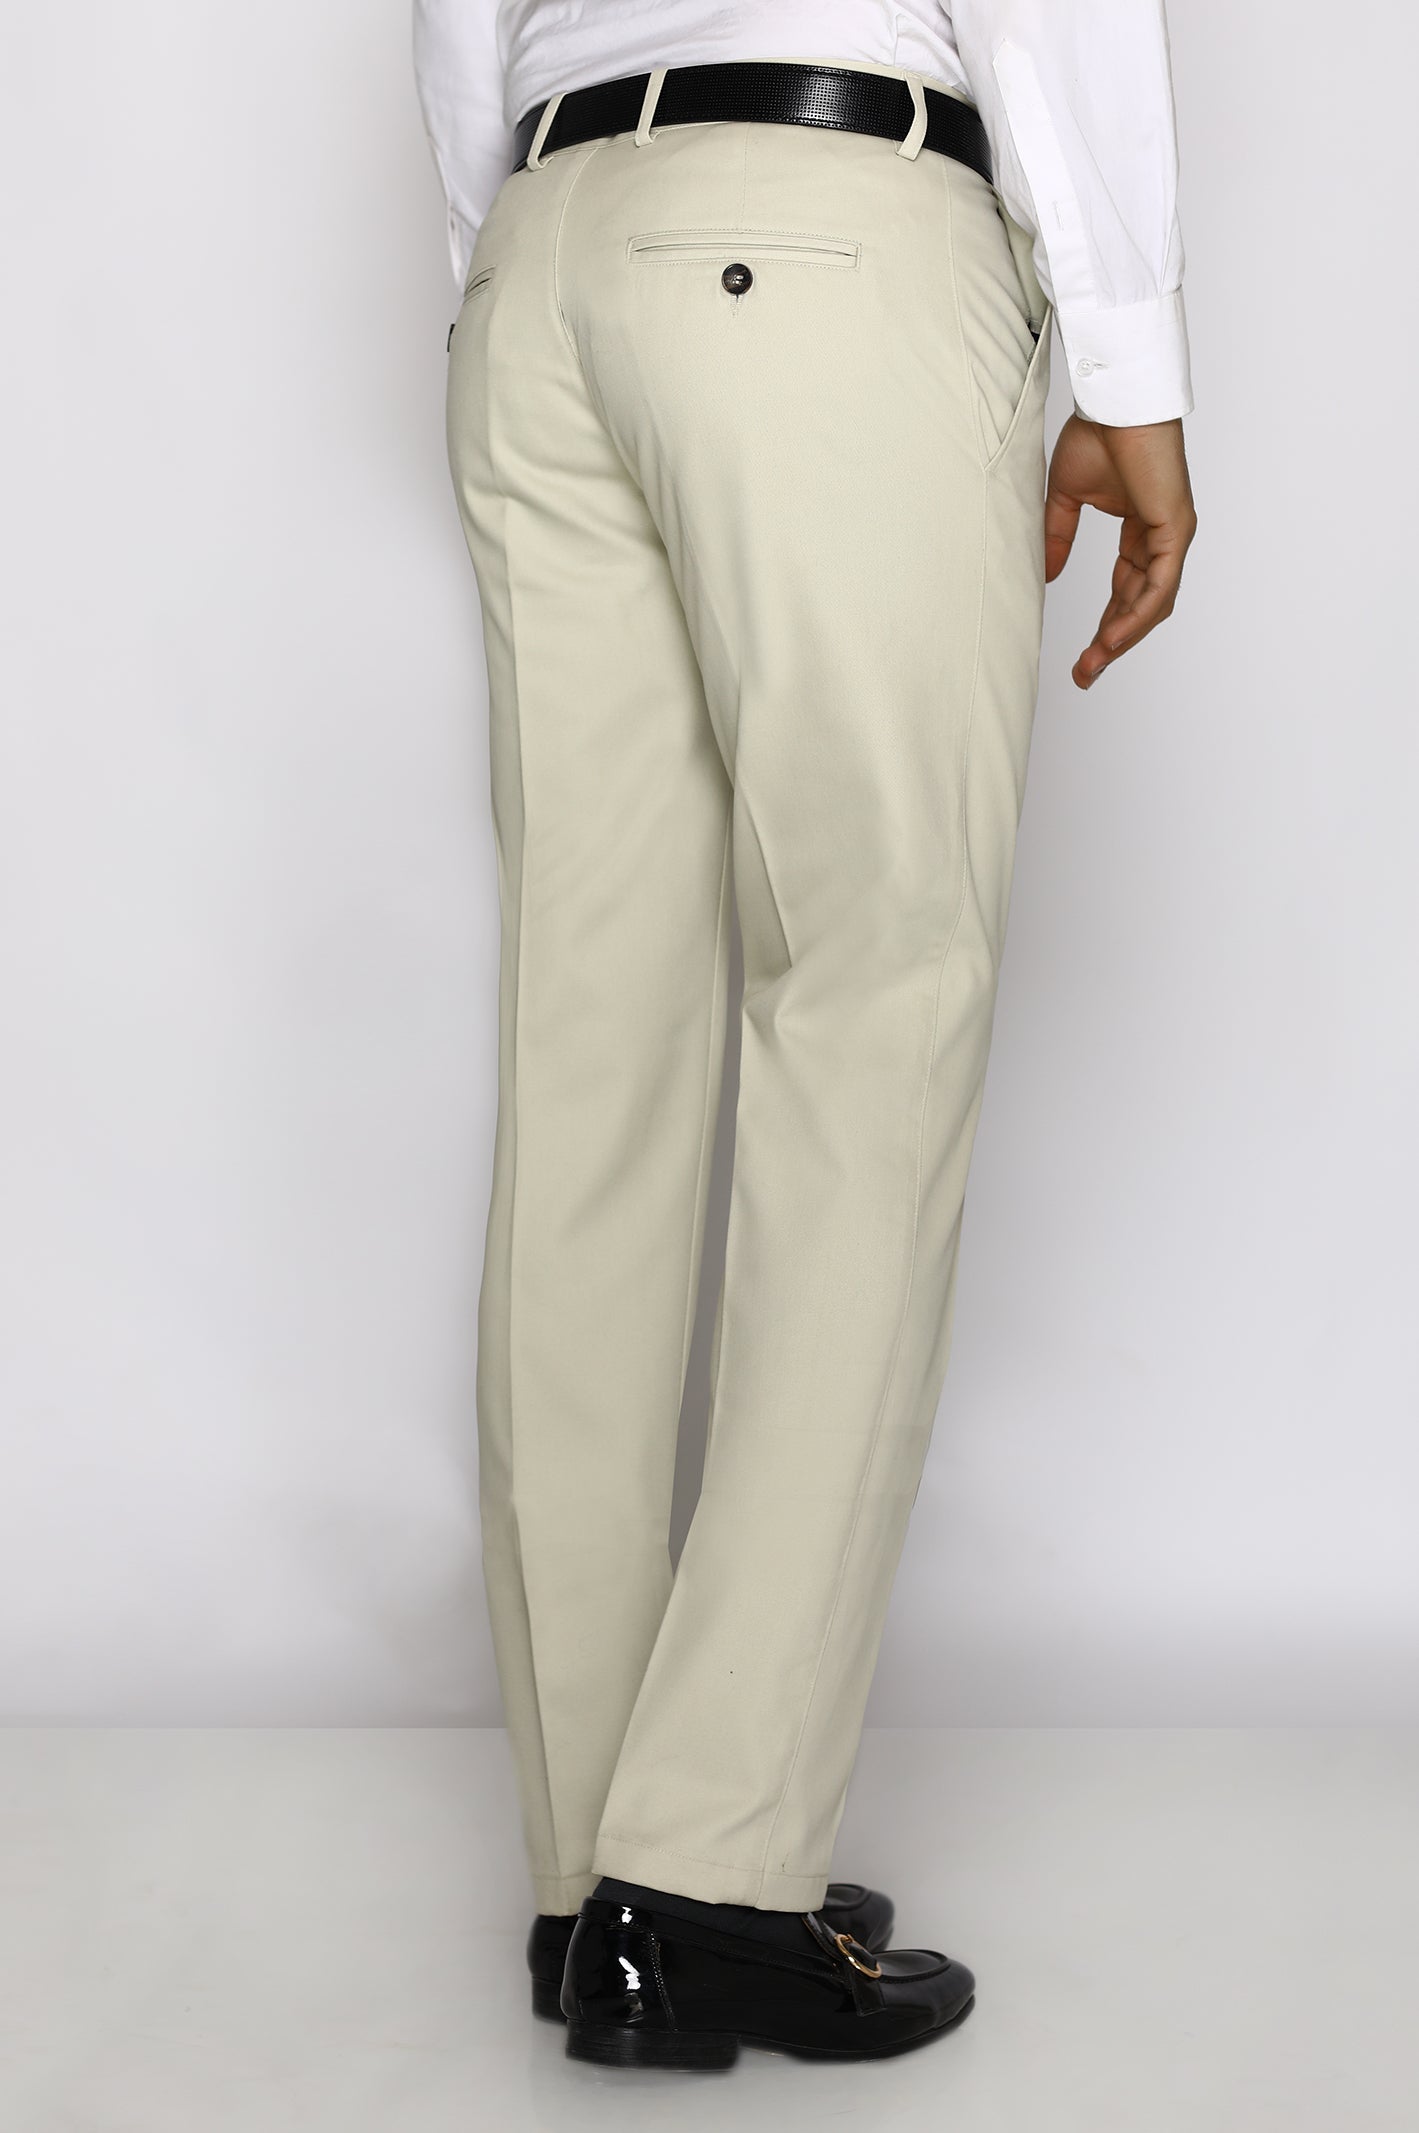 Peter England cream round insert front pockets with jetted back pocket  comfort fit cotton trousers